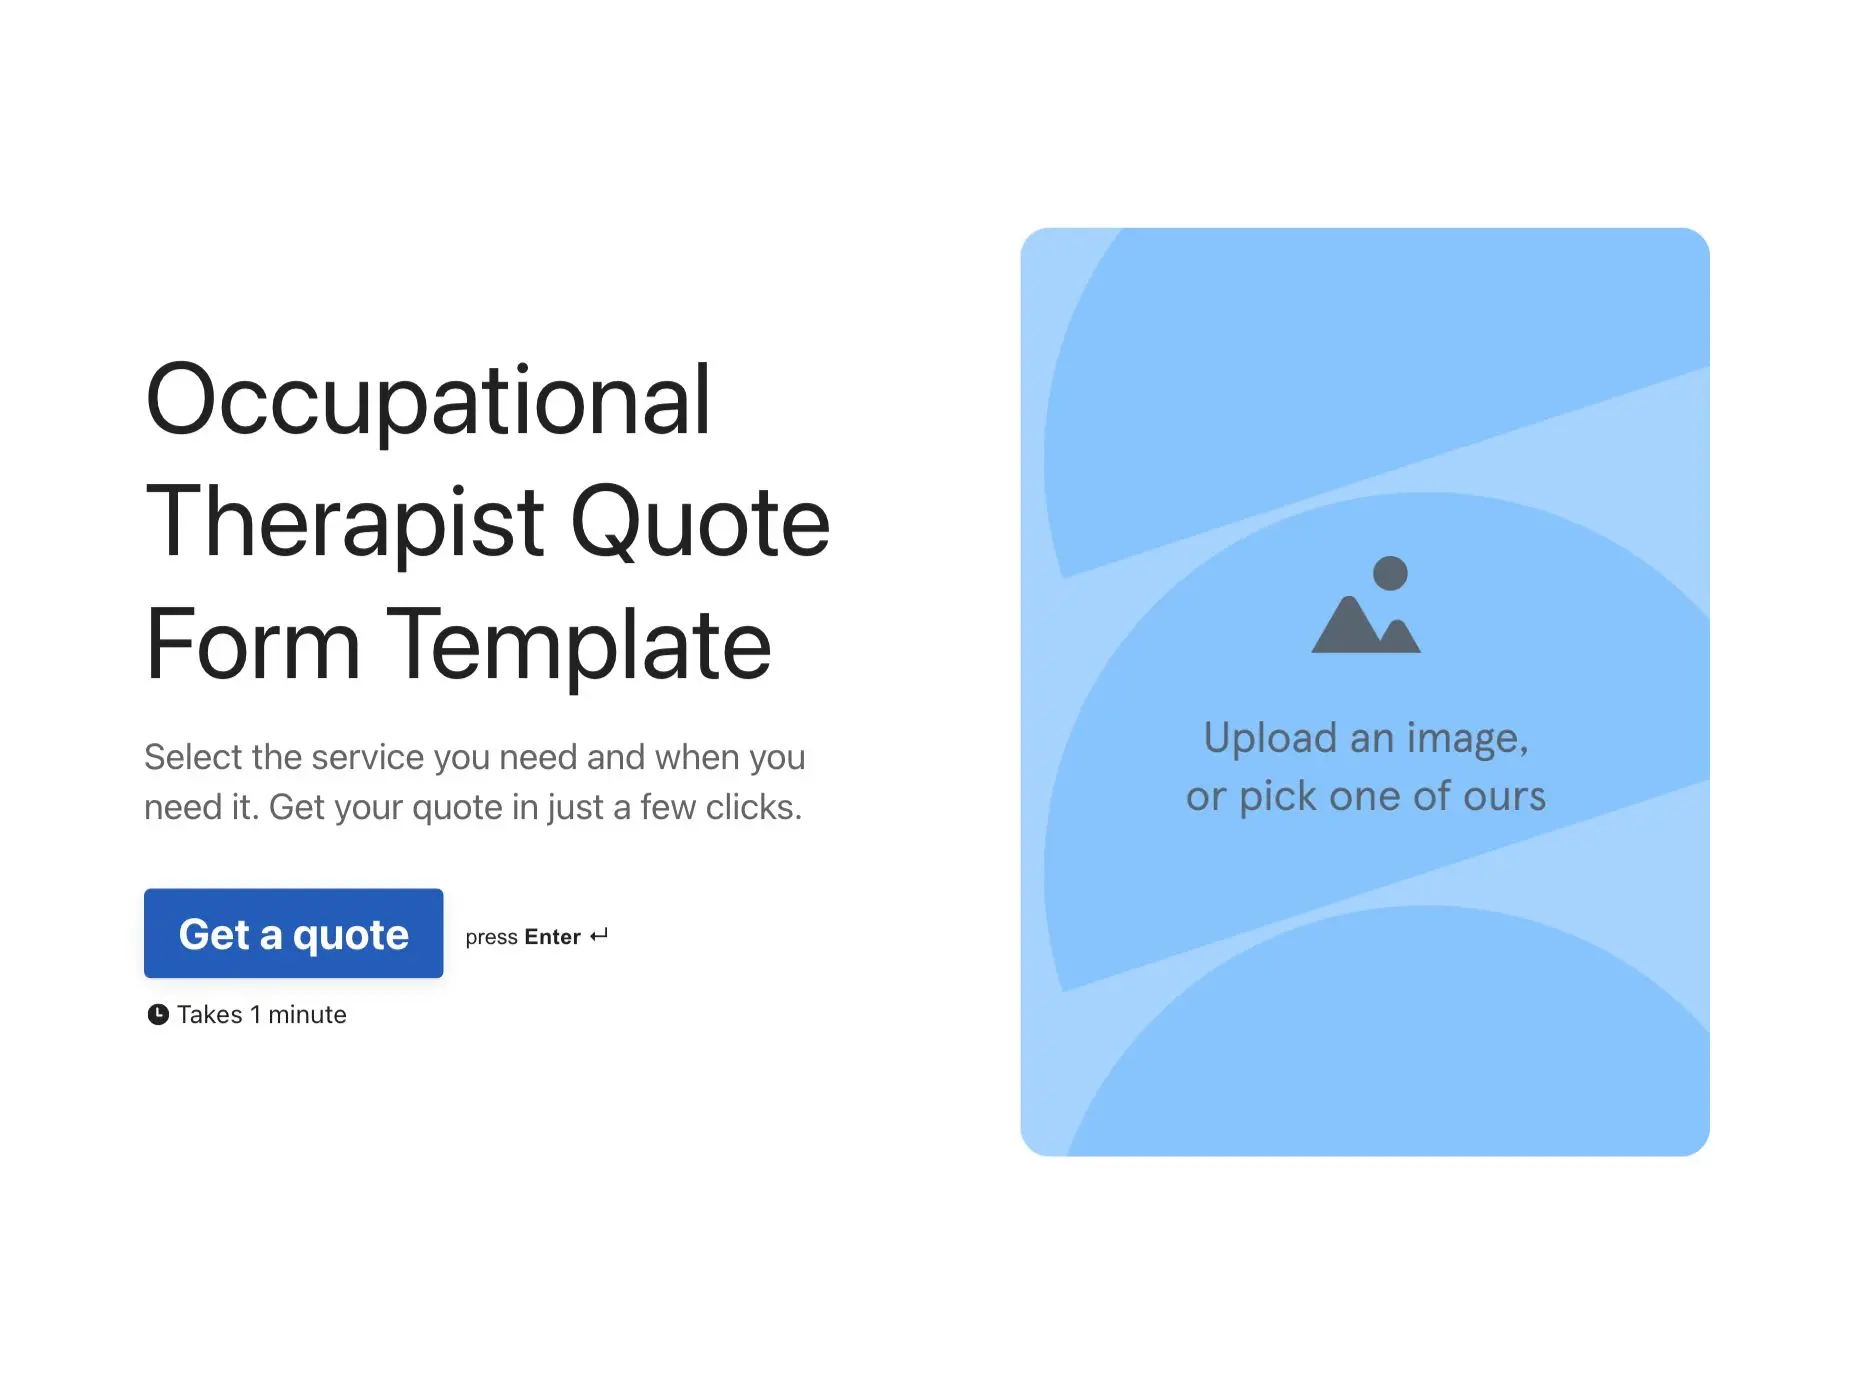 Occupational Therapist Quote Form Template Hero